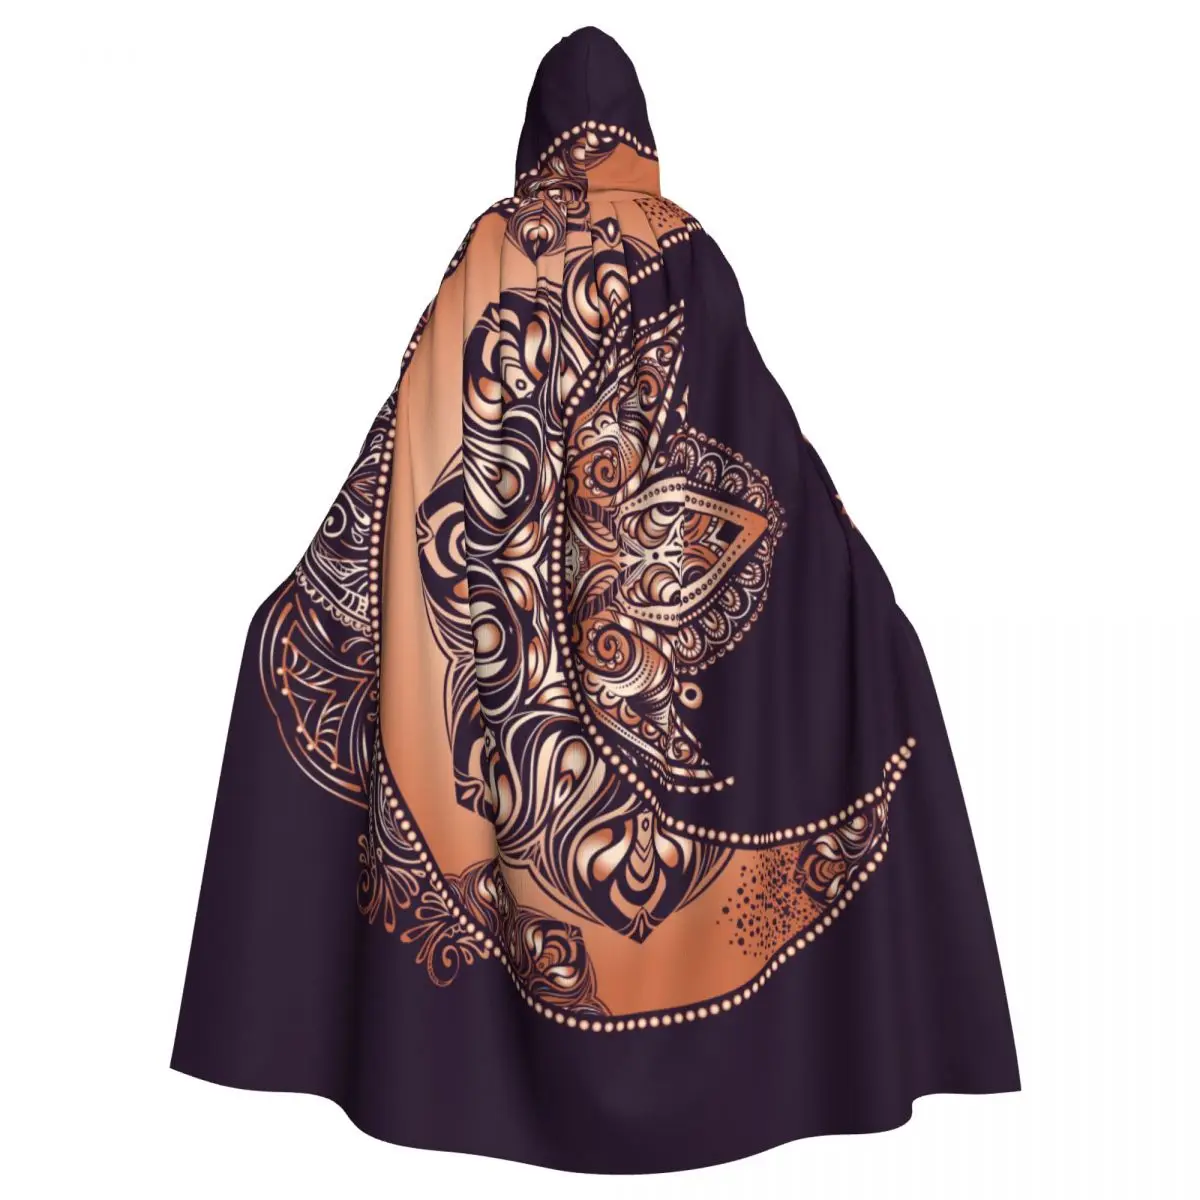 

Unisex Witch Party Reversible Hooded Adult Vampires Cape Cloak Boho Chic Golden Crescent Moon And Sun Mandala Astrology Alchemy